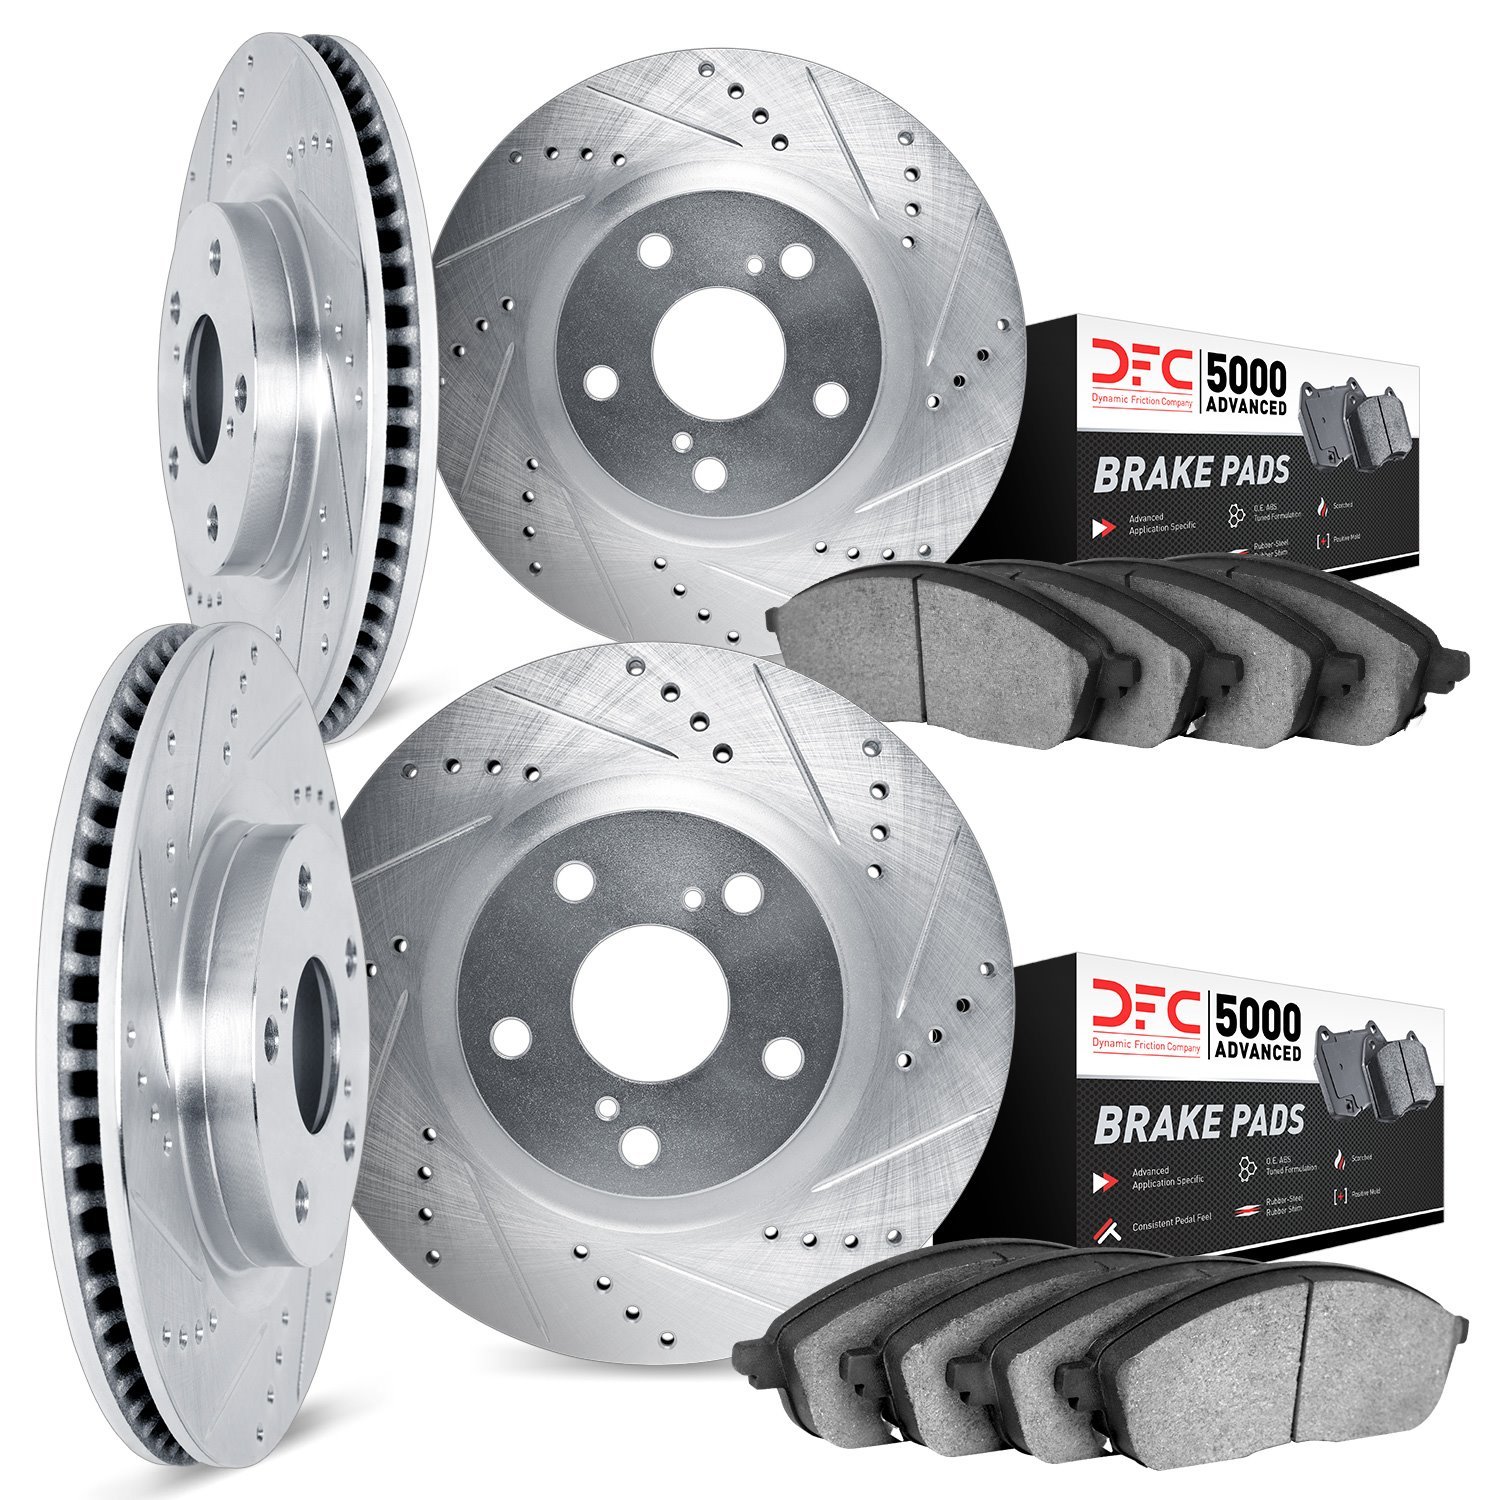 7504-63005 Drilled/Slotted Brake Rotors w/5000 Advanced Brake Pads Kit [Silver], 2017-2017 Mercedes-Benz, Position: Front and Re